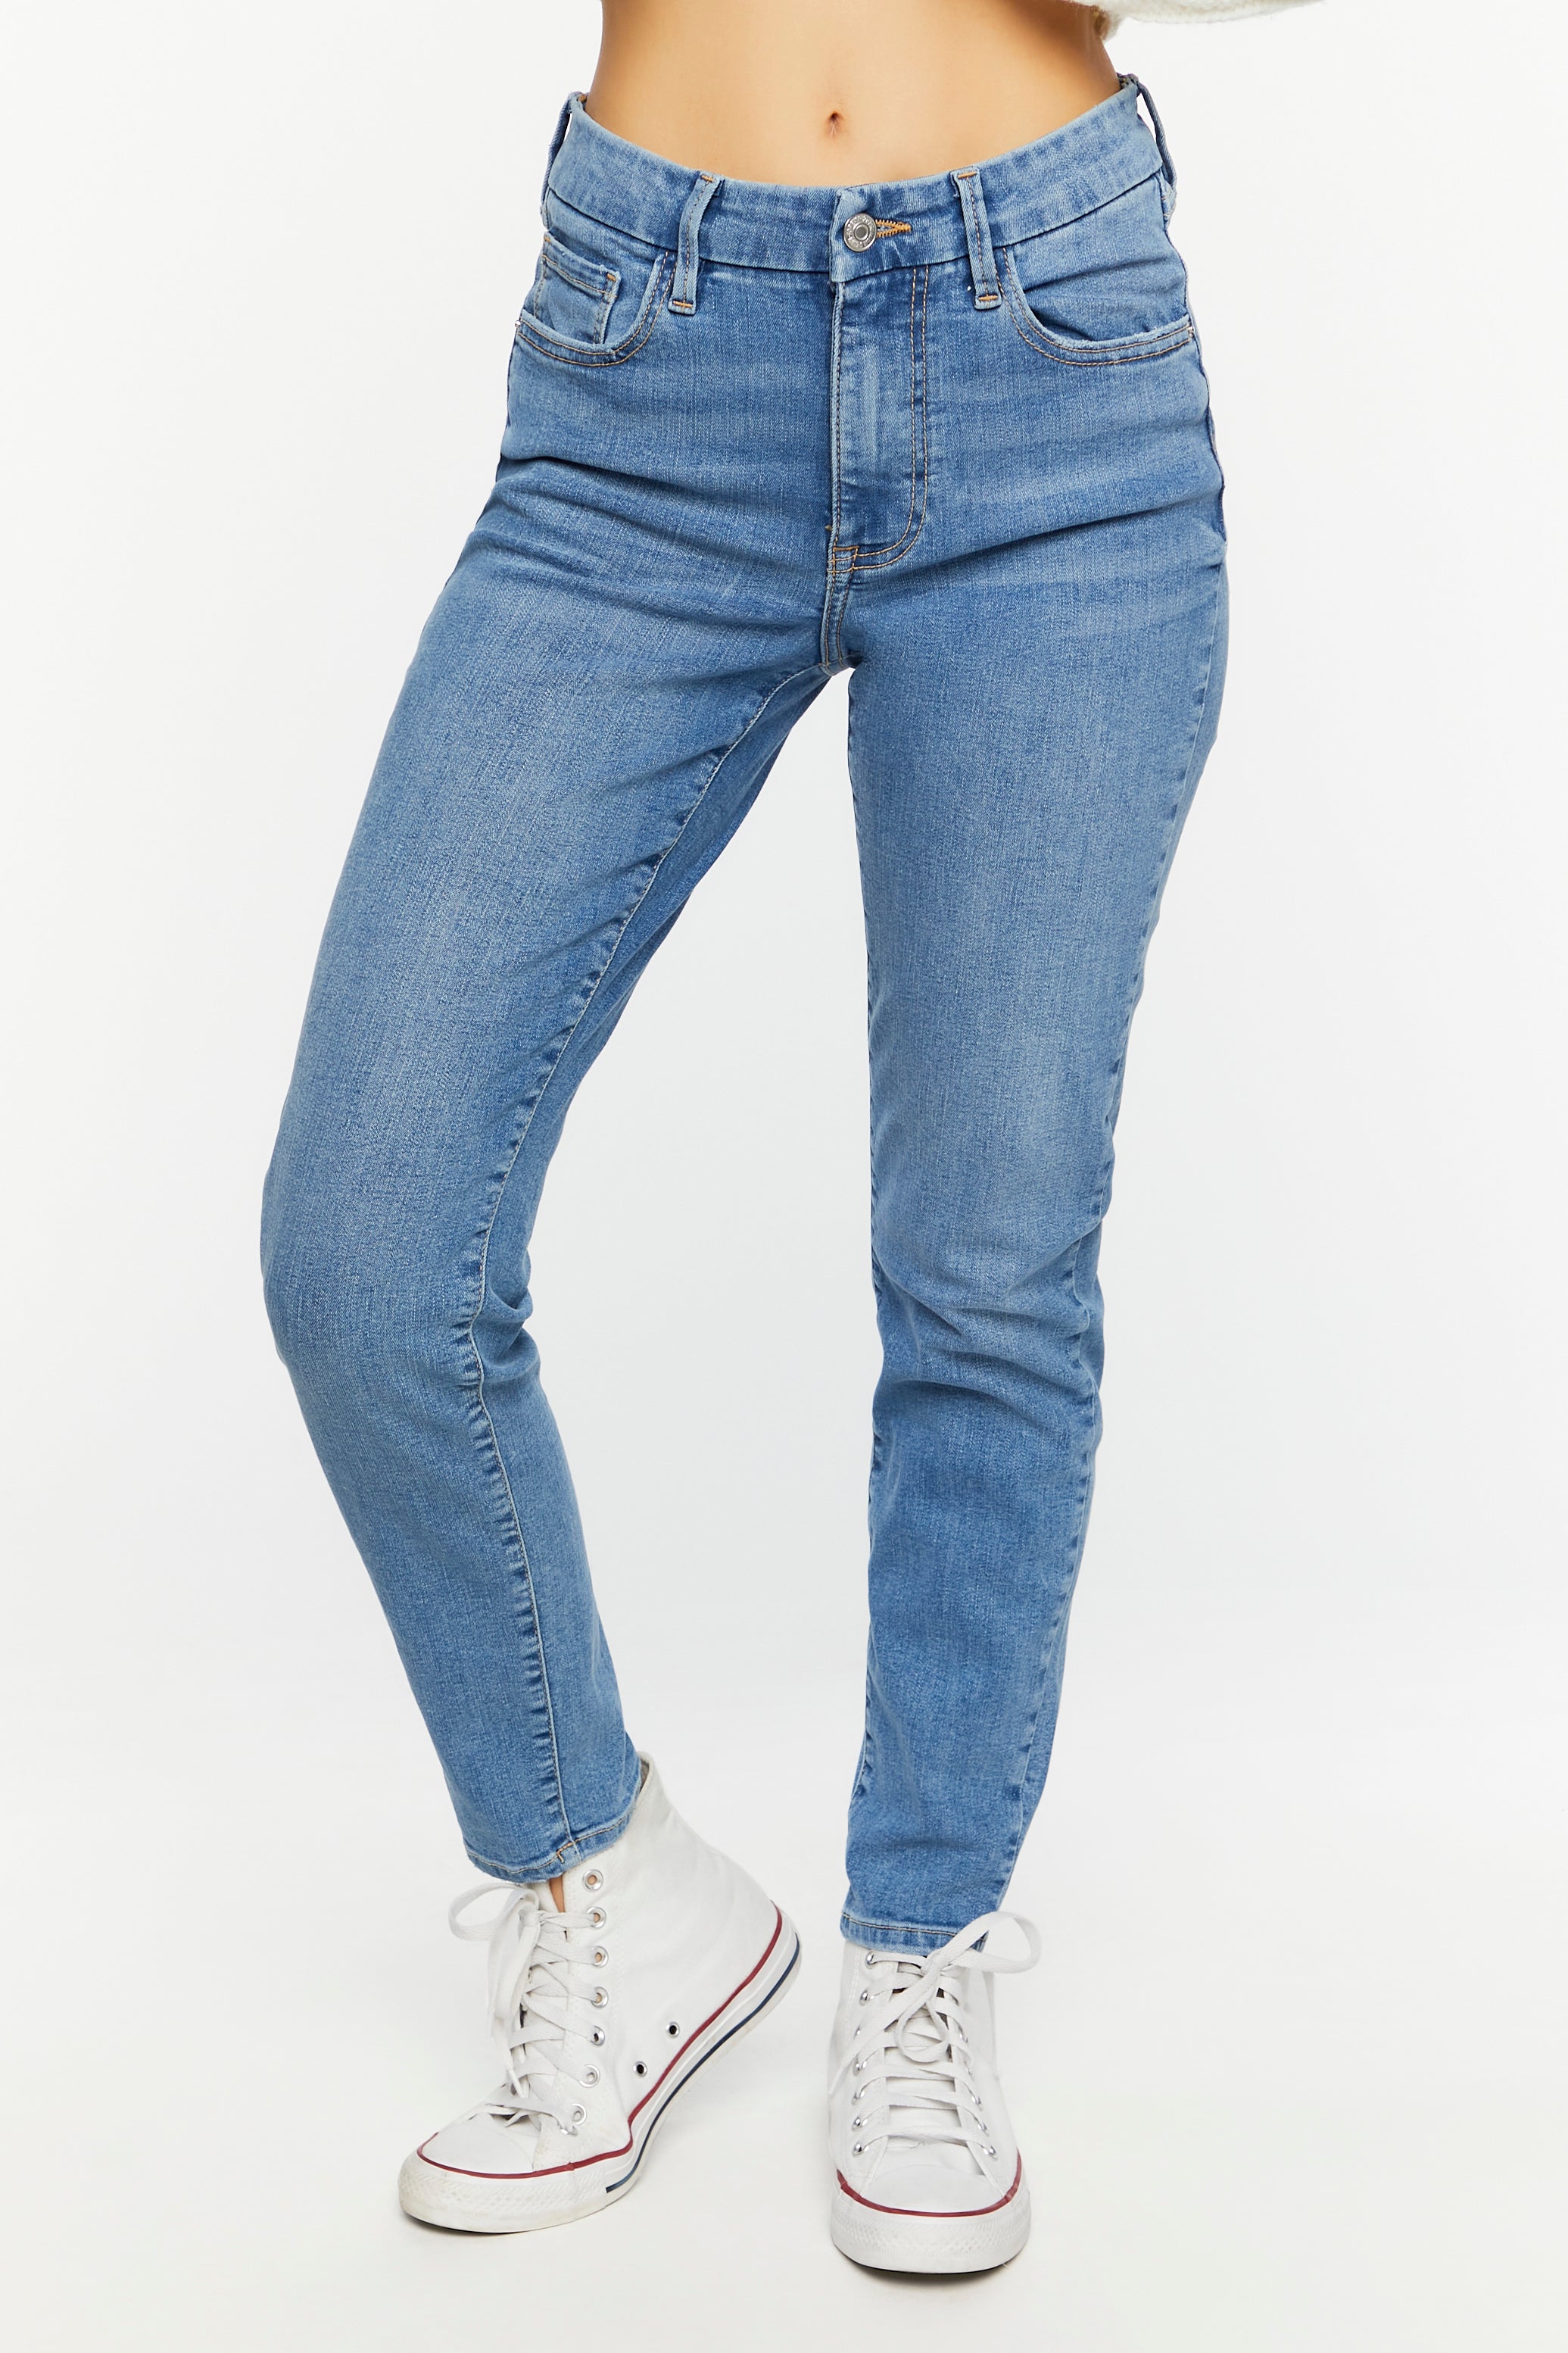 Mediumdenim Recycled Cotton Mid-Rise Skinny Jeans